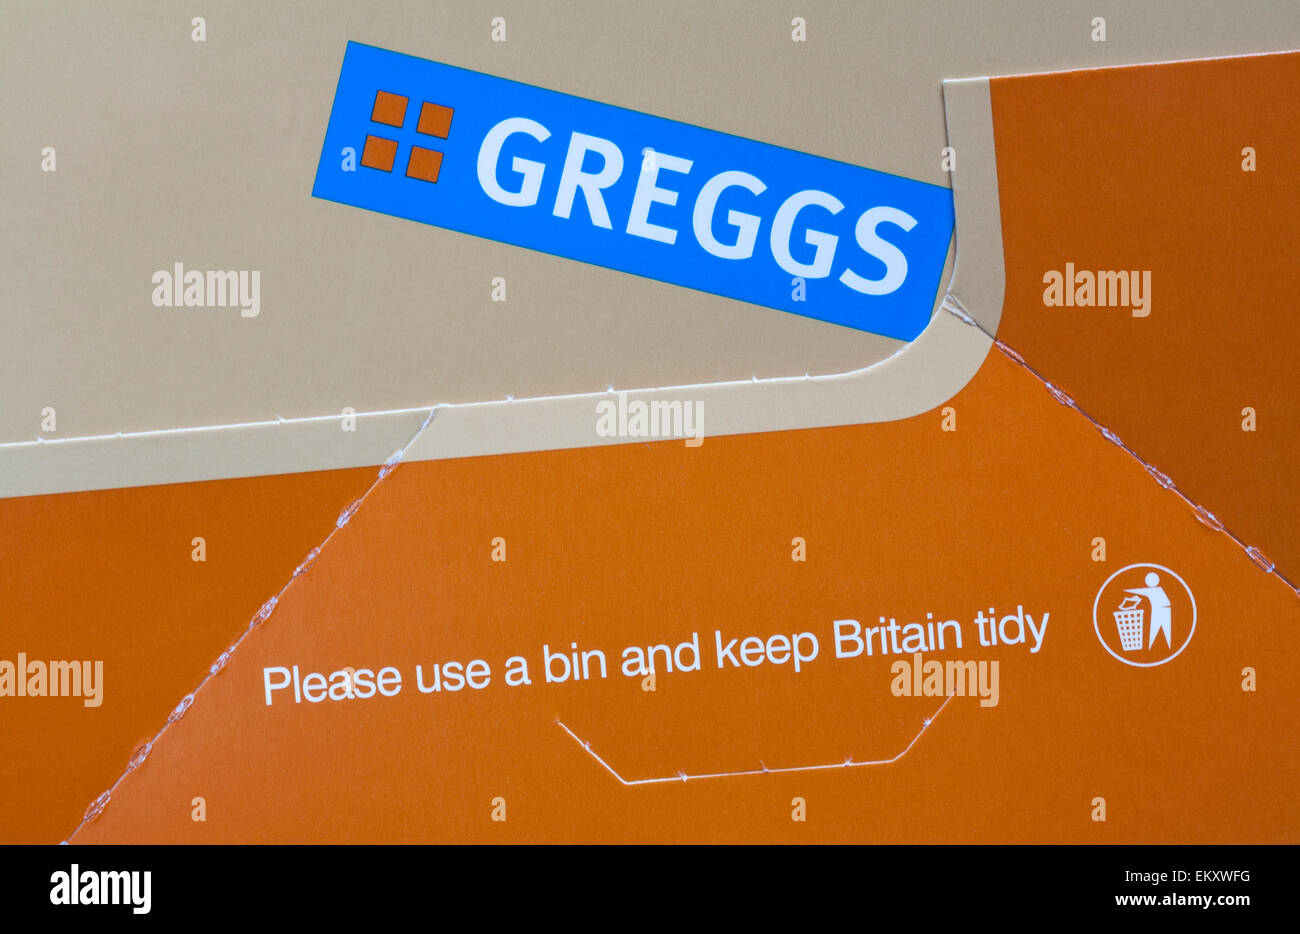 Greggs please use a bin and keep Britain tidy detail on box Stock Photo